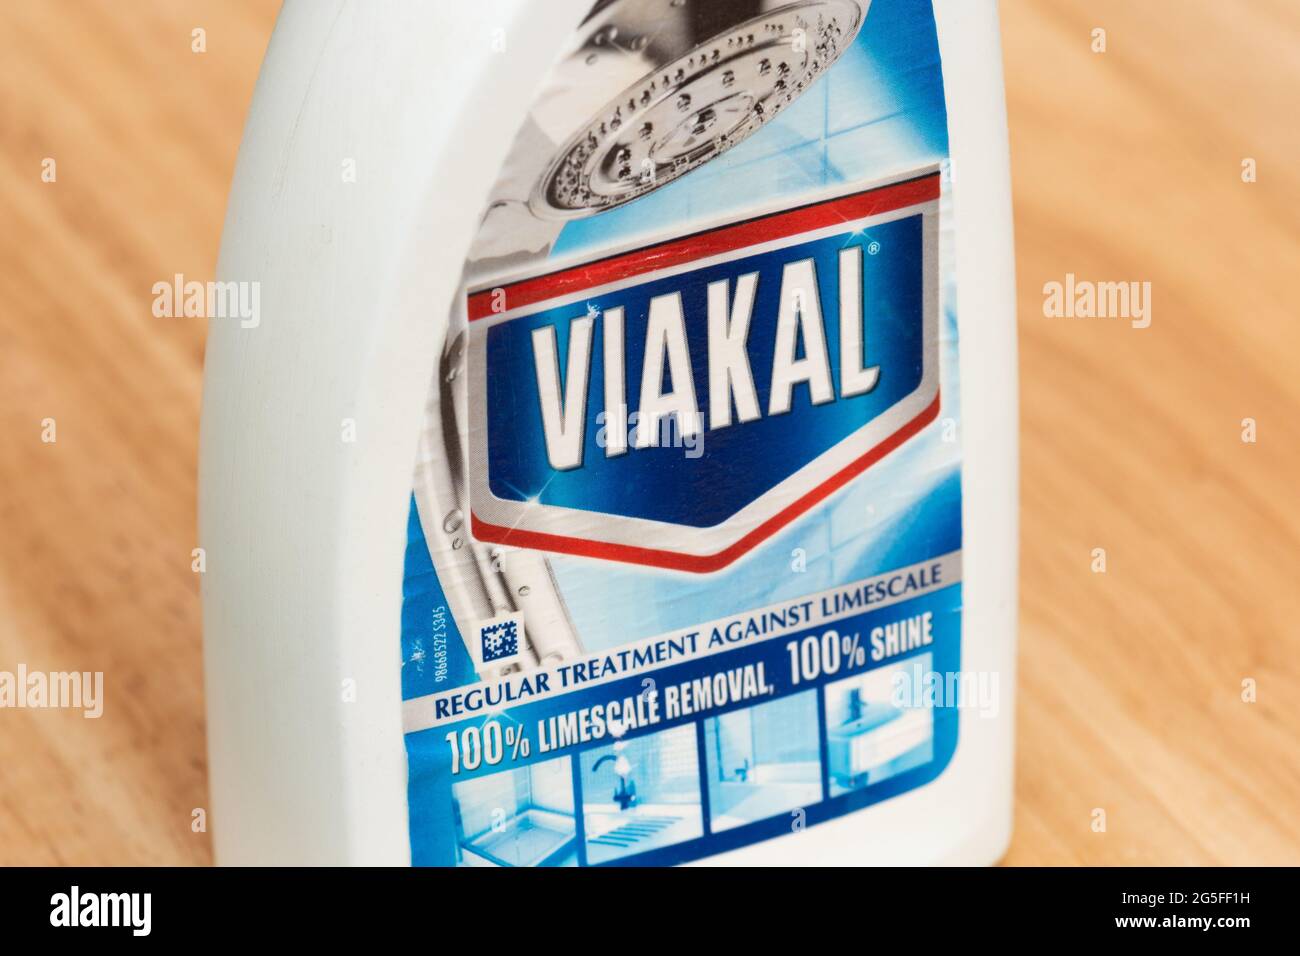 Viakal limescale removing bathroom cleaning product in a spray